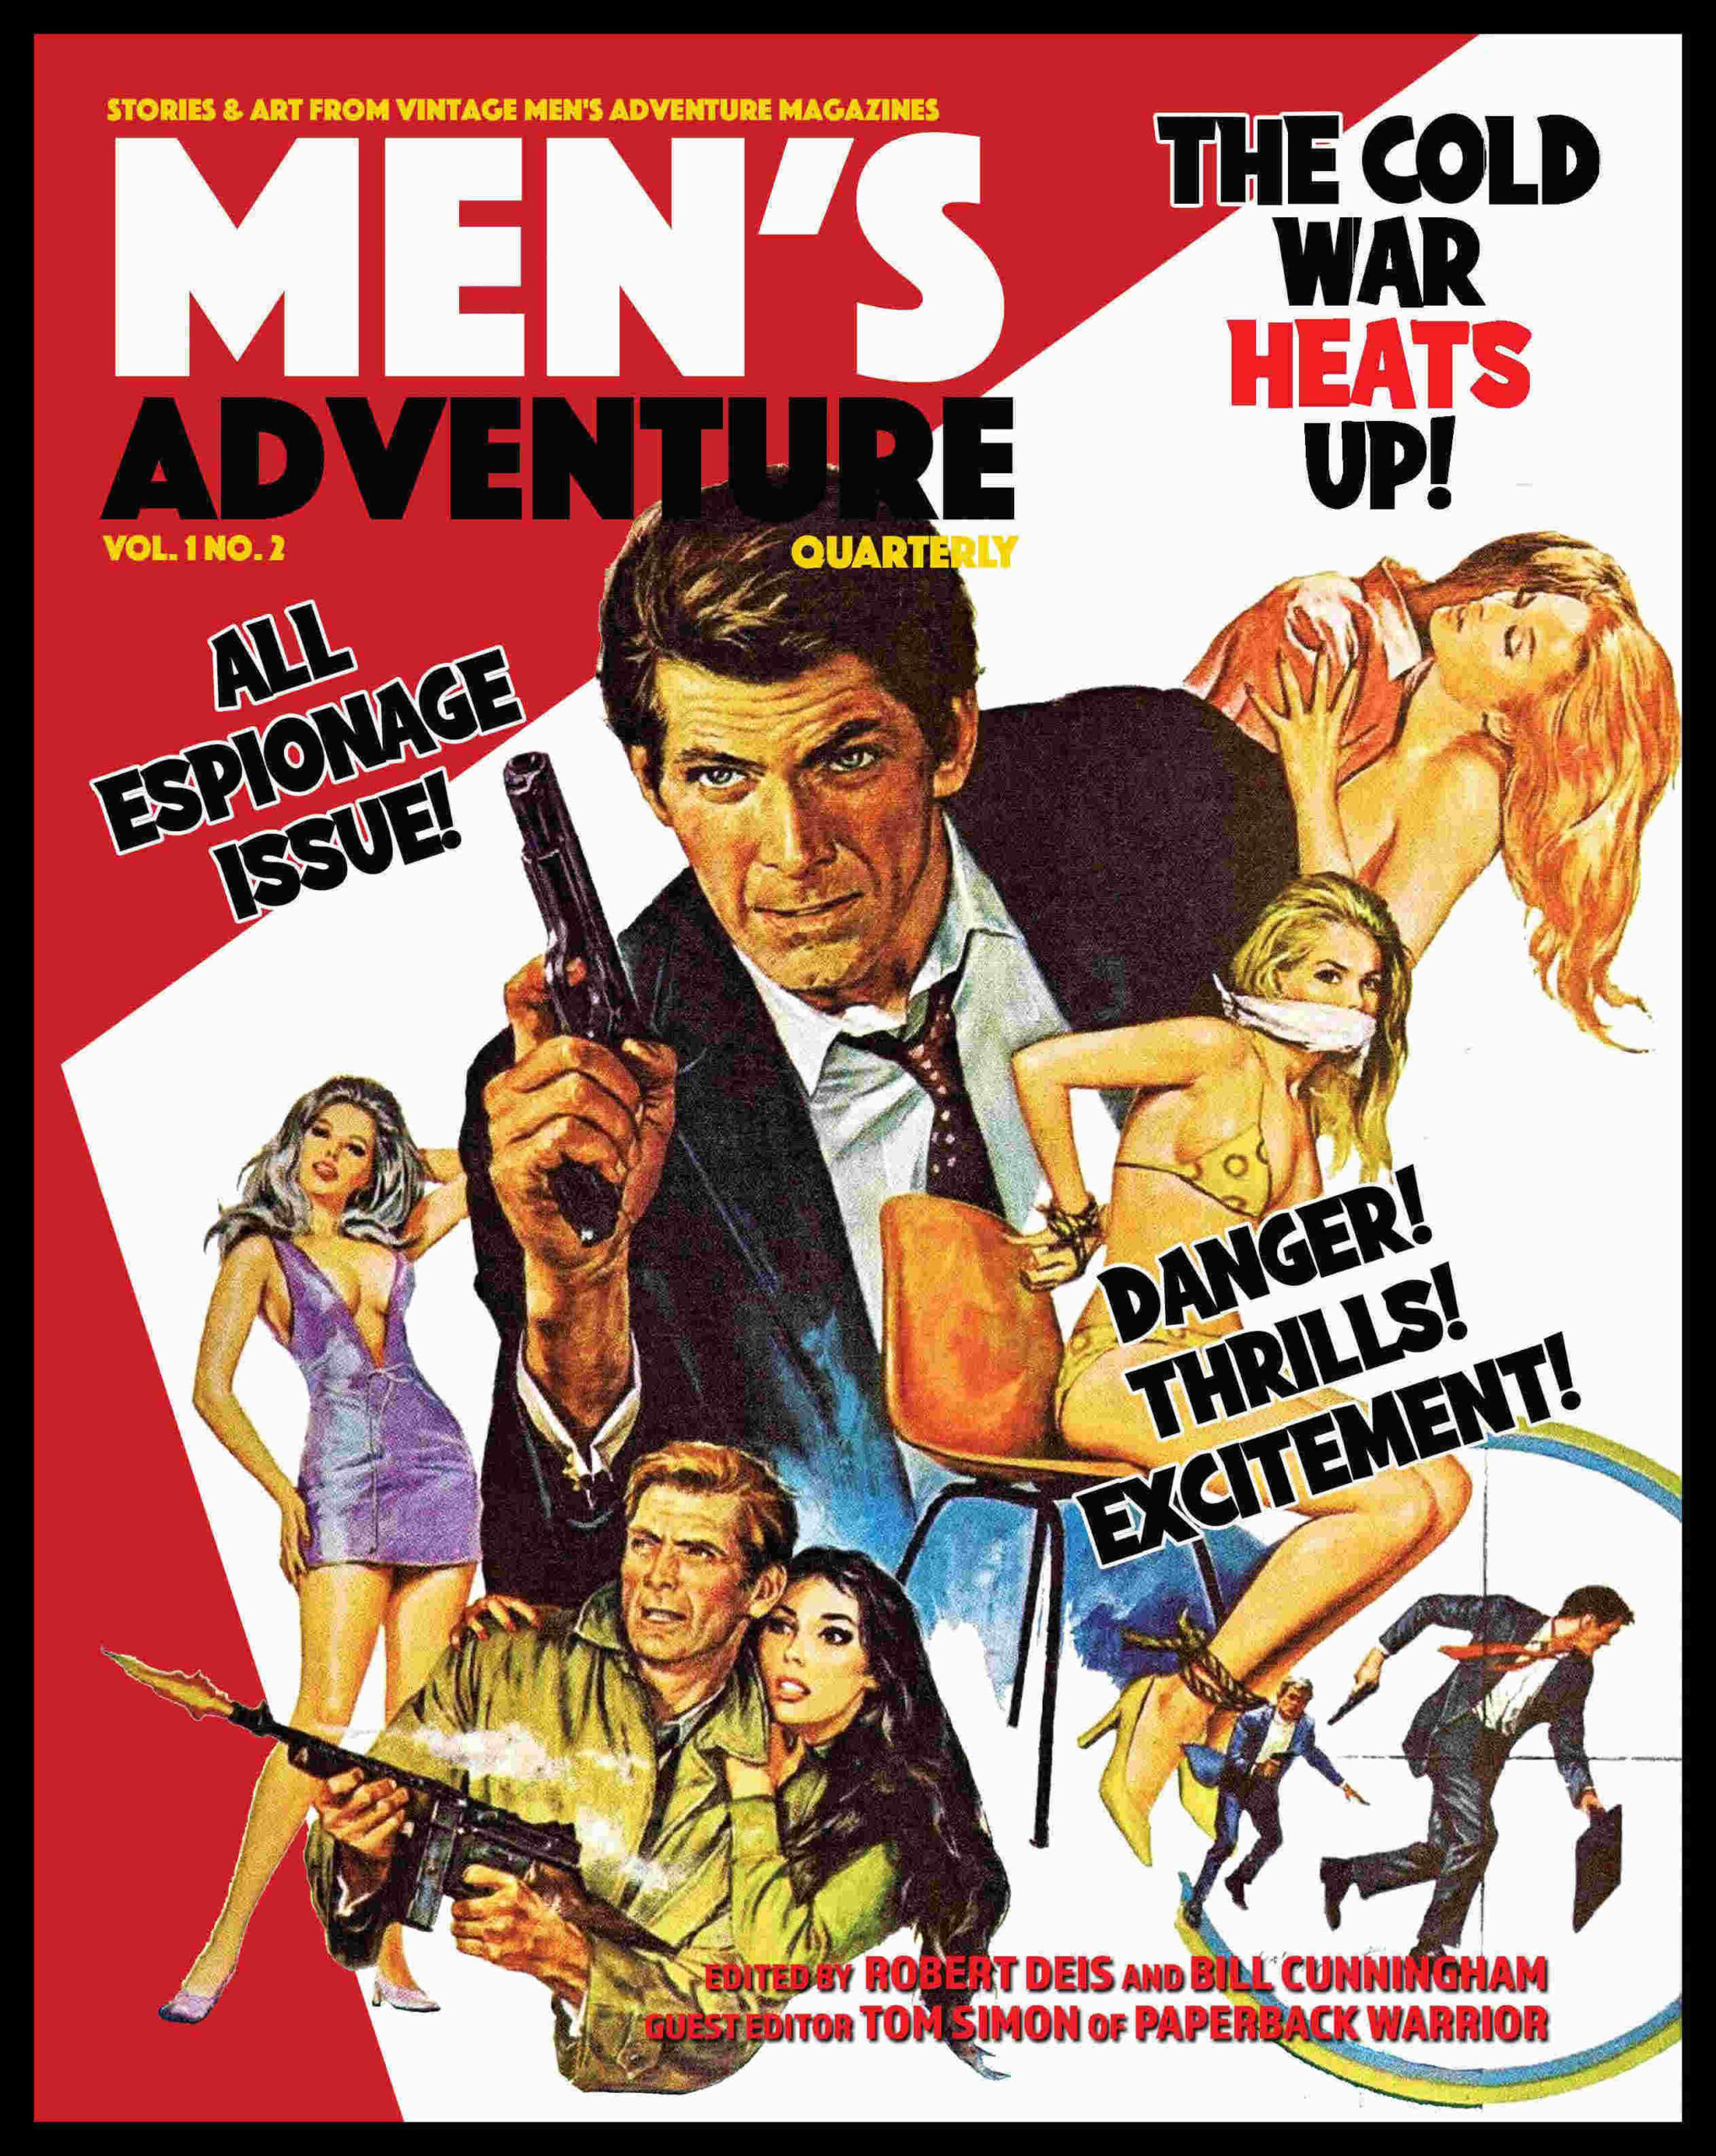 The Men’s Adventure Quarterly Vol 1 No 2 Our Spy Stories And Artwork Issue The Men S